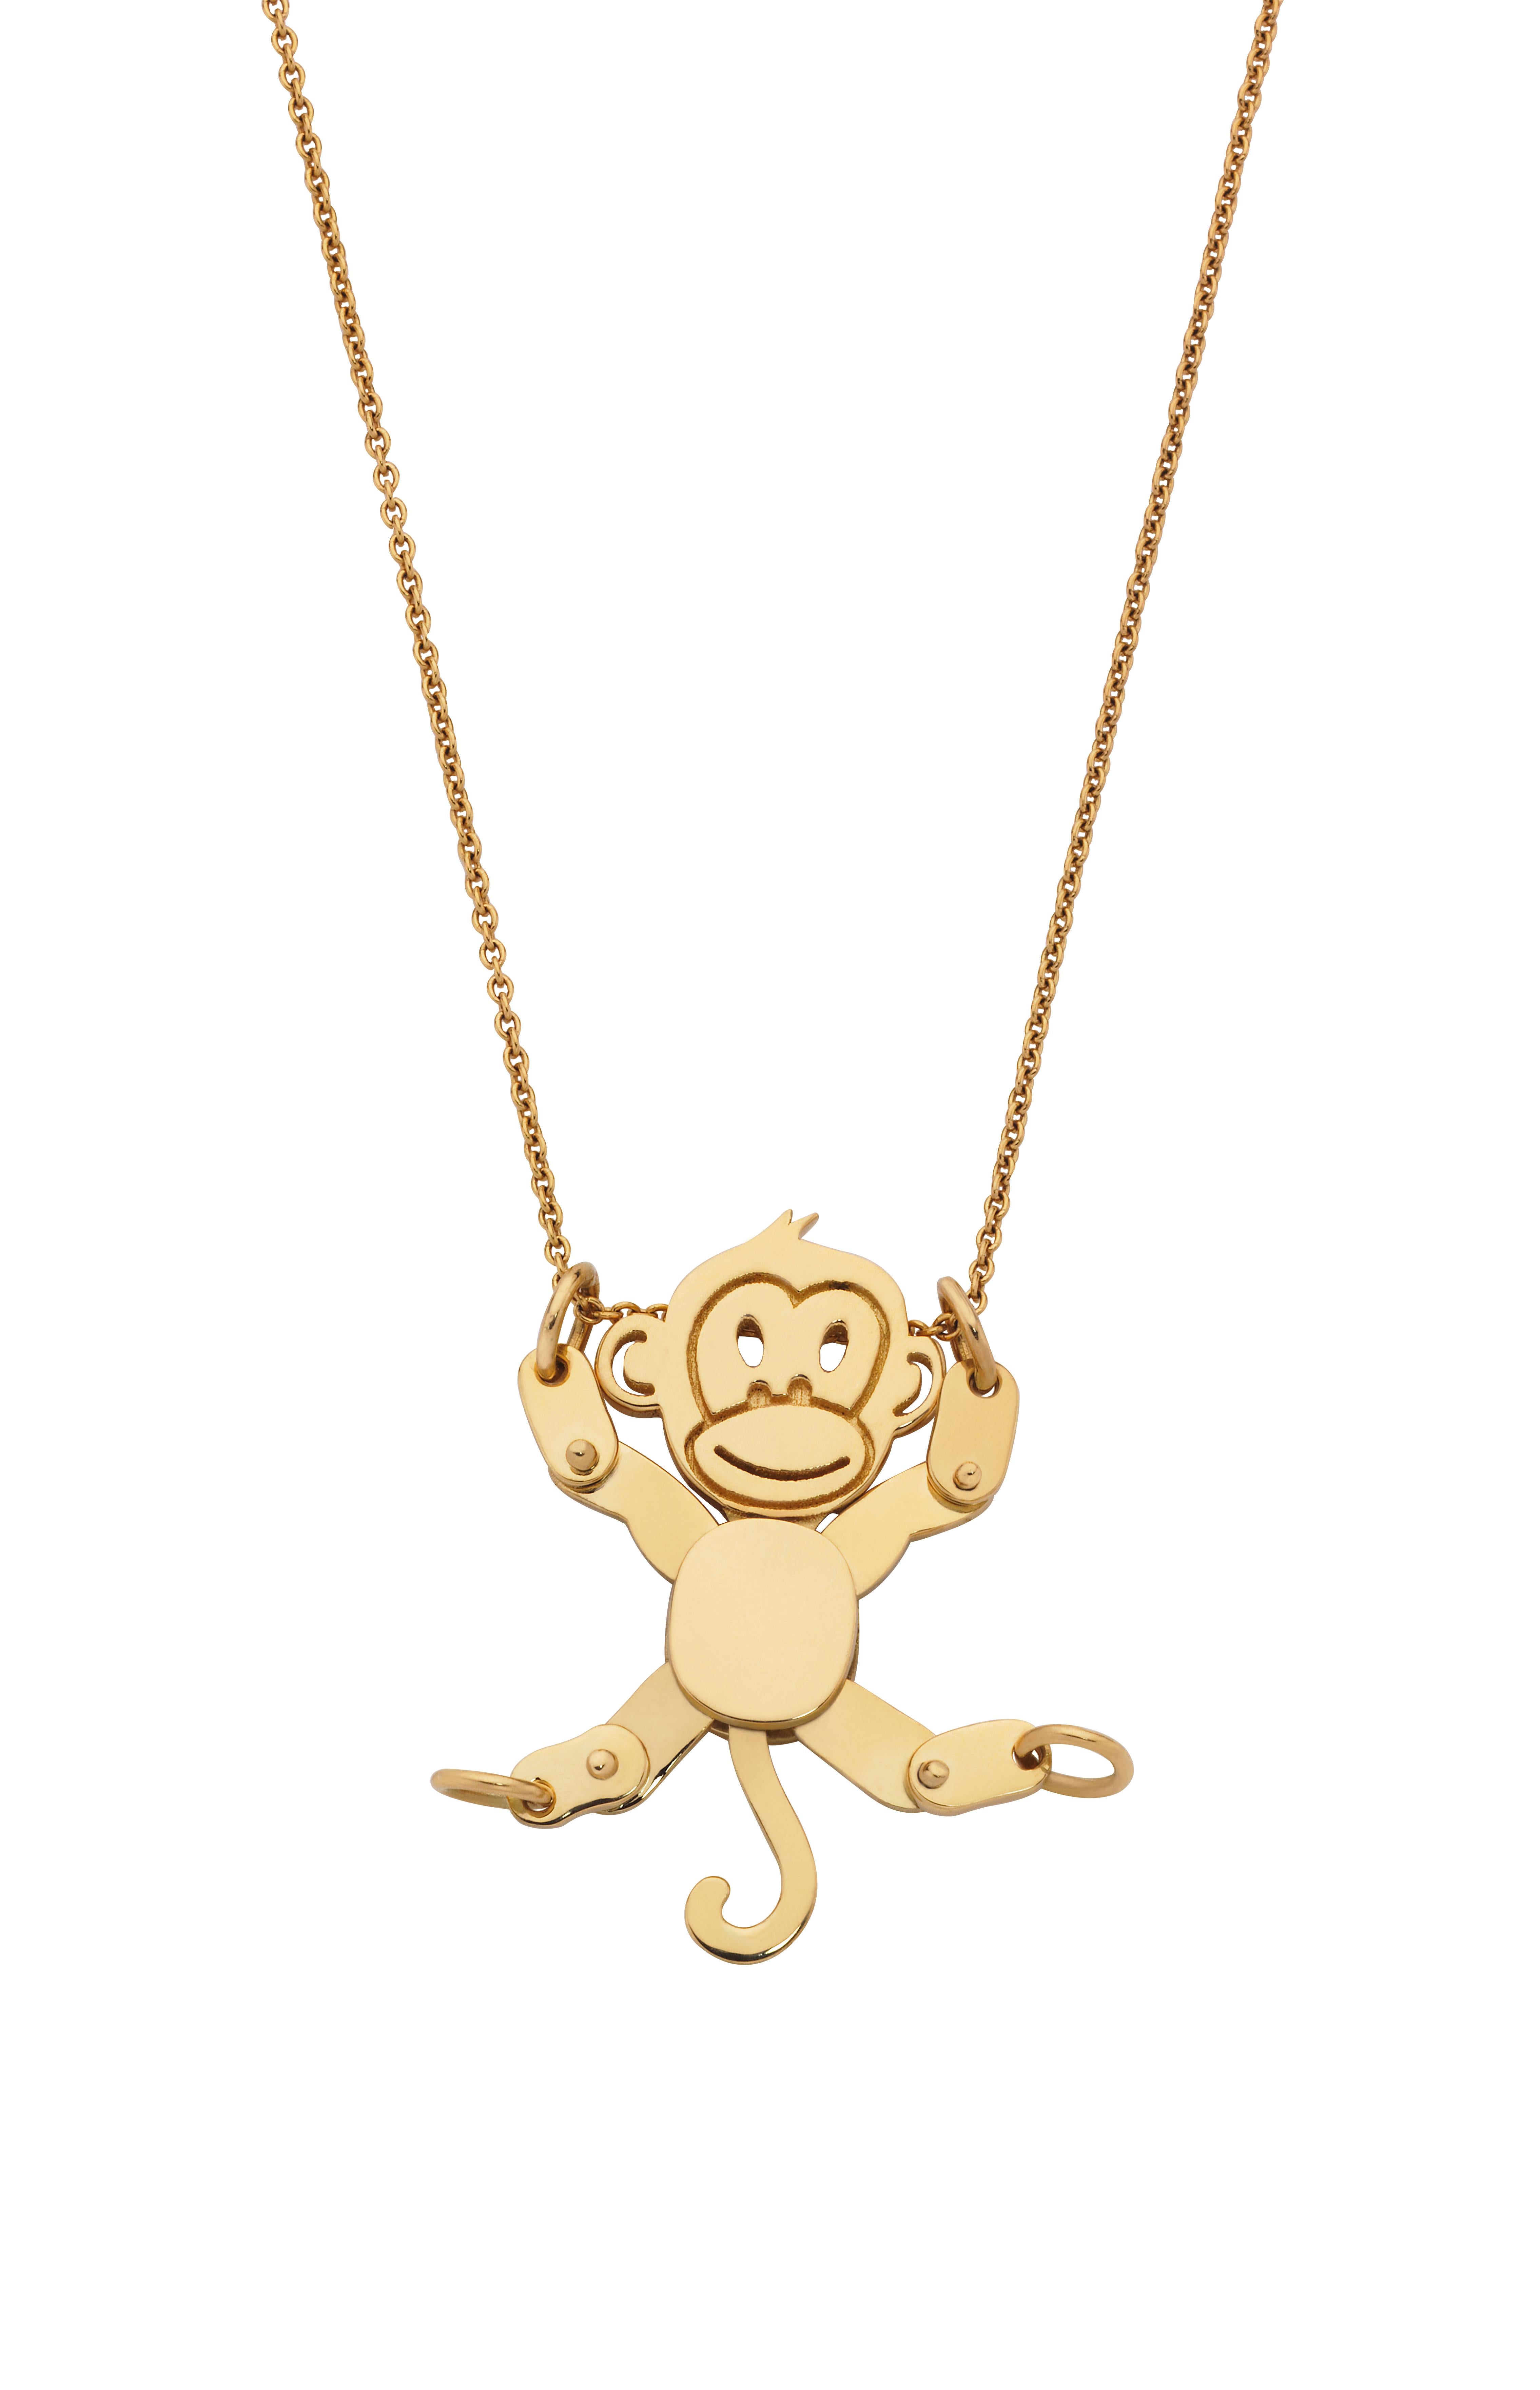 Giulians 18 karat yellow gold movable monkey pendant.  This playful pendant features a monkey with articulated arms and legs.  The chain can run through any of the loops in the hands or feet, allowing for the monkey to be worn in a myriad of poses. 